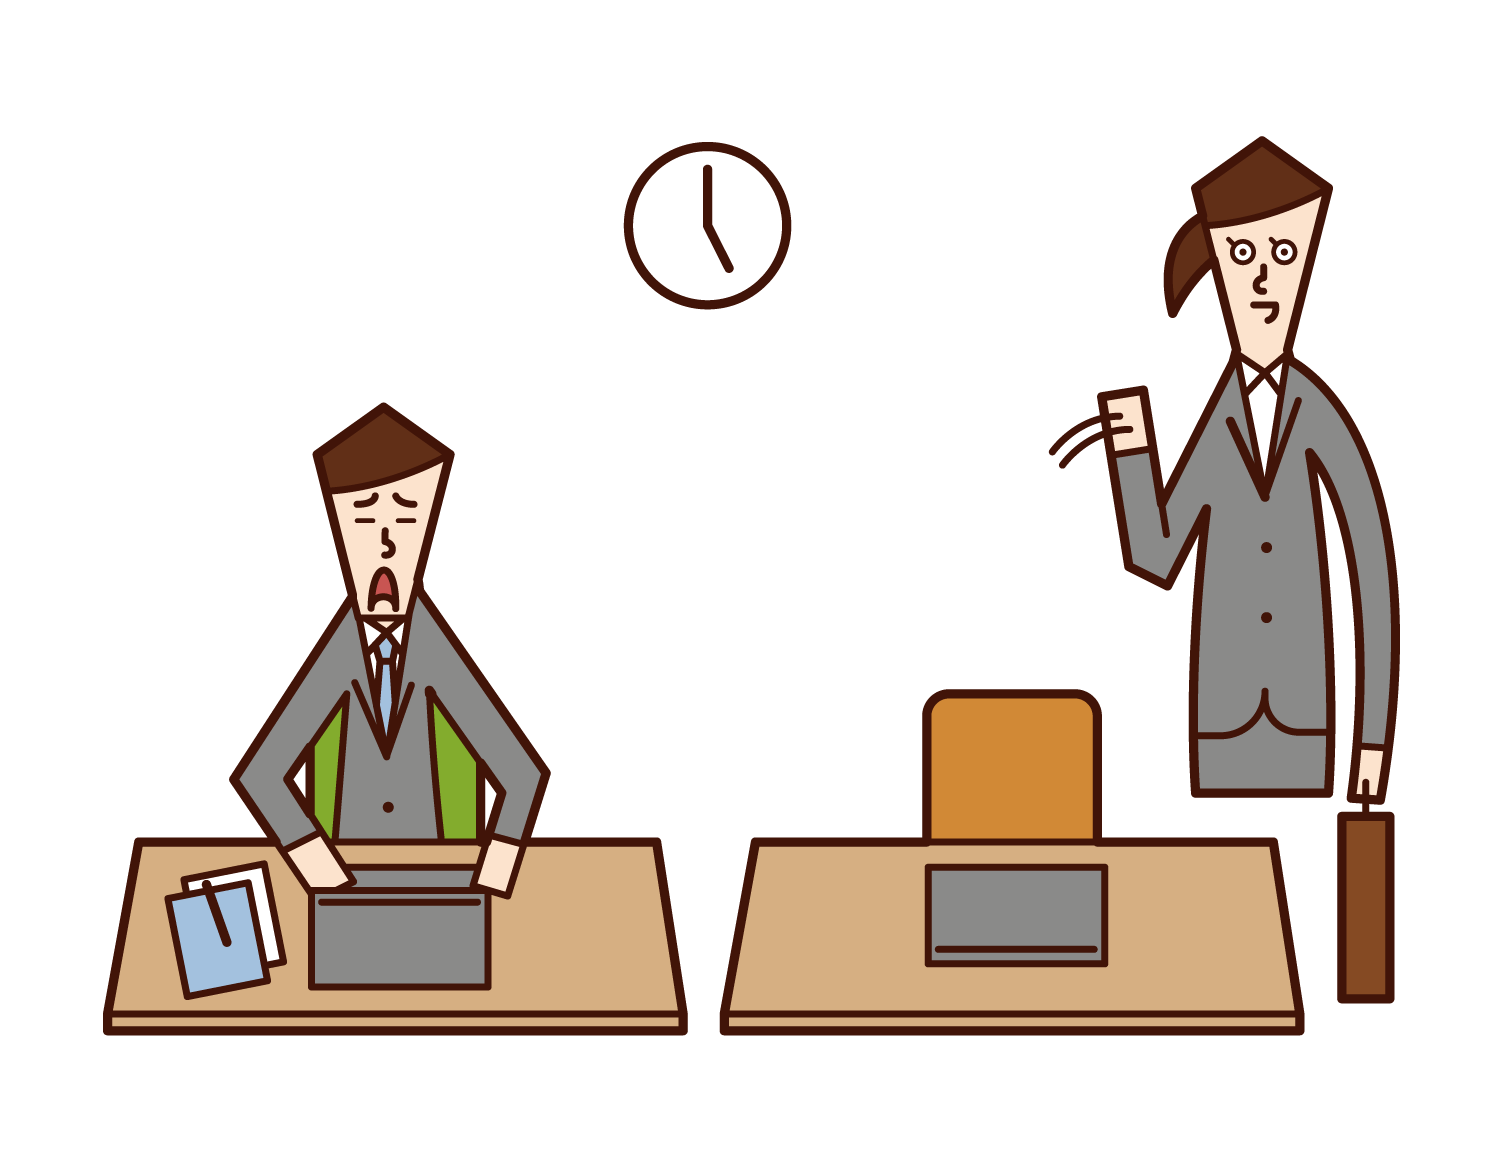 Illustration of a person (man) who comes to work